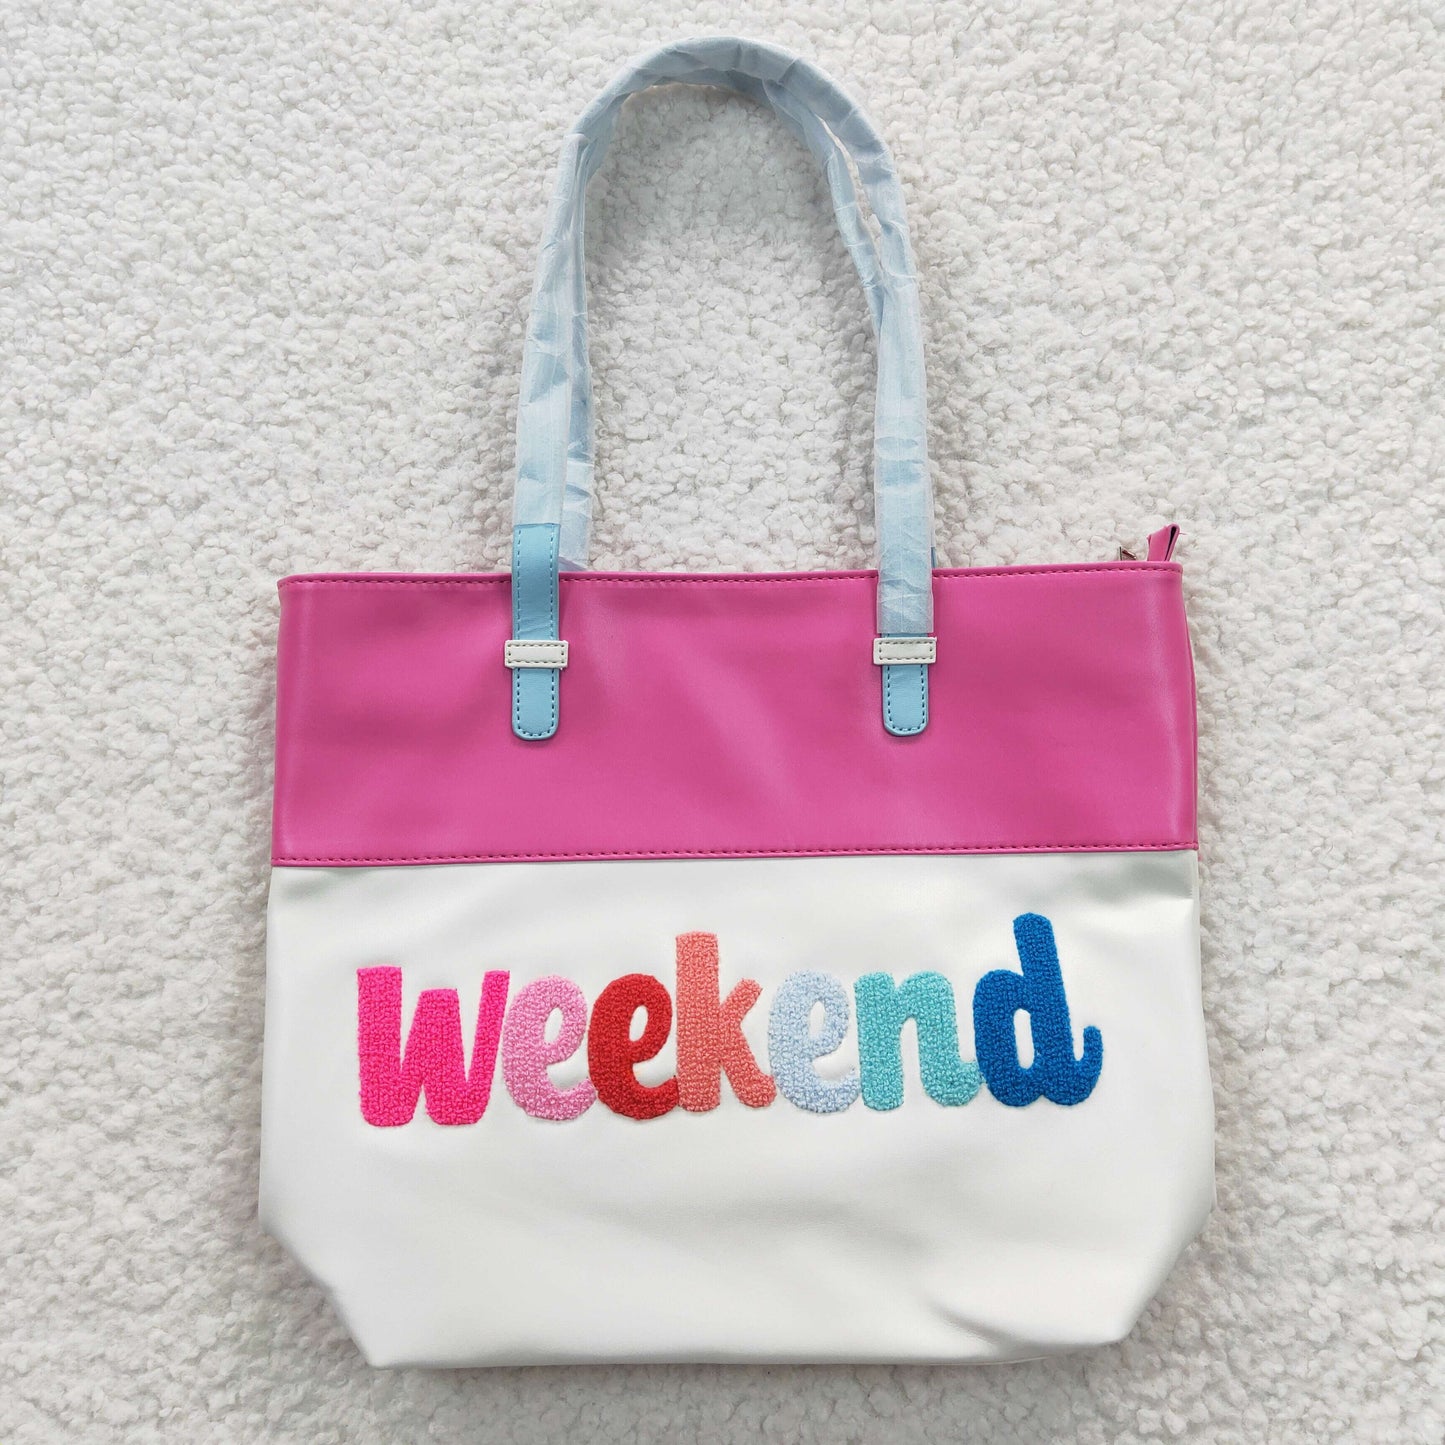 High quality leather weekend print Tote bag